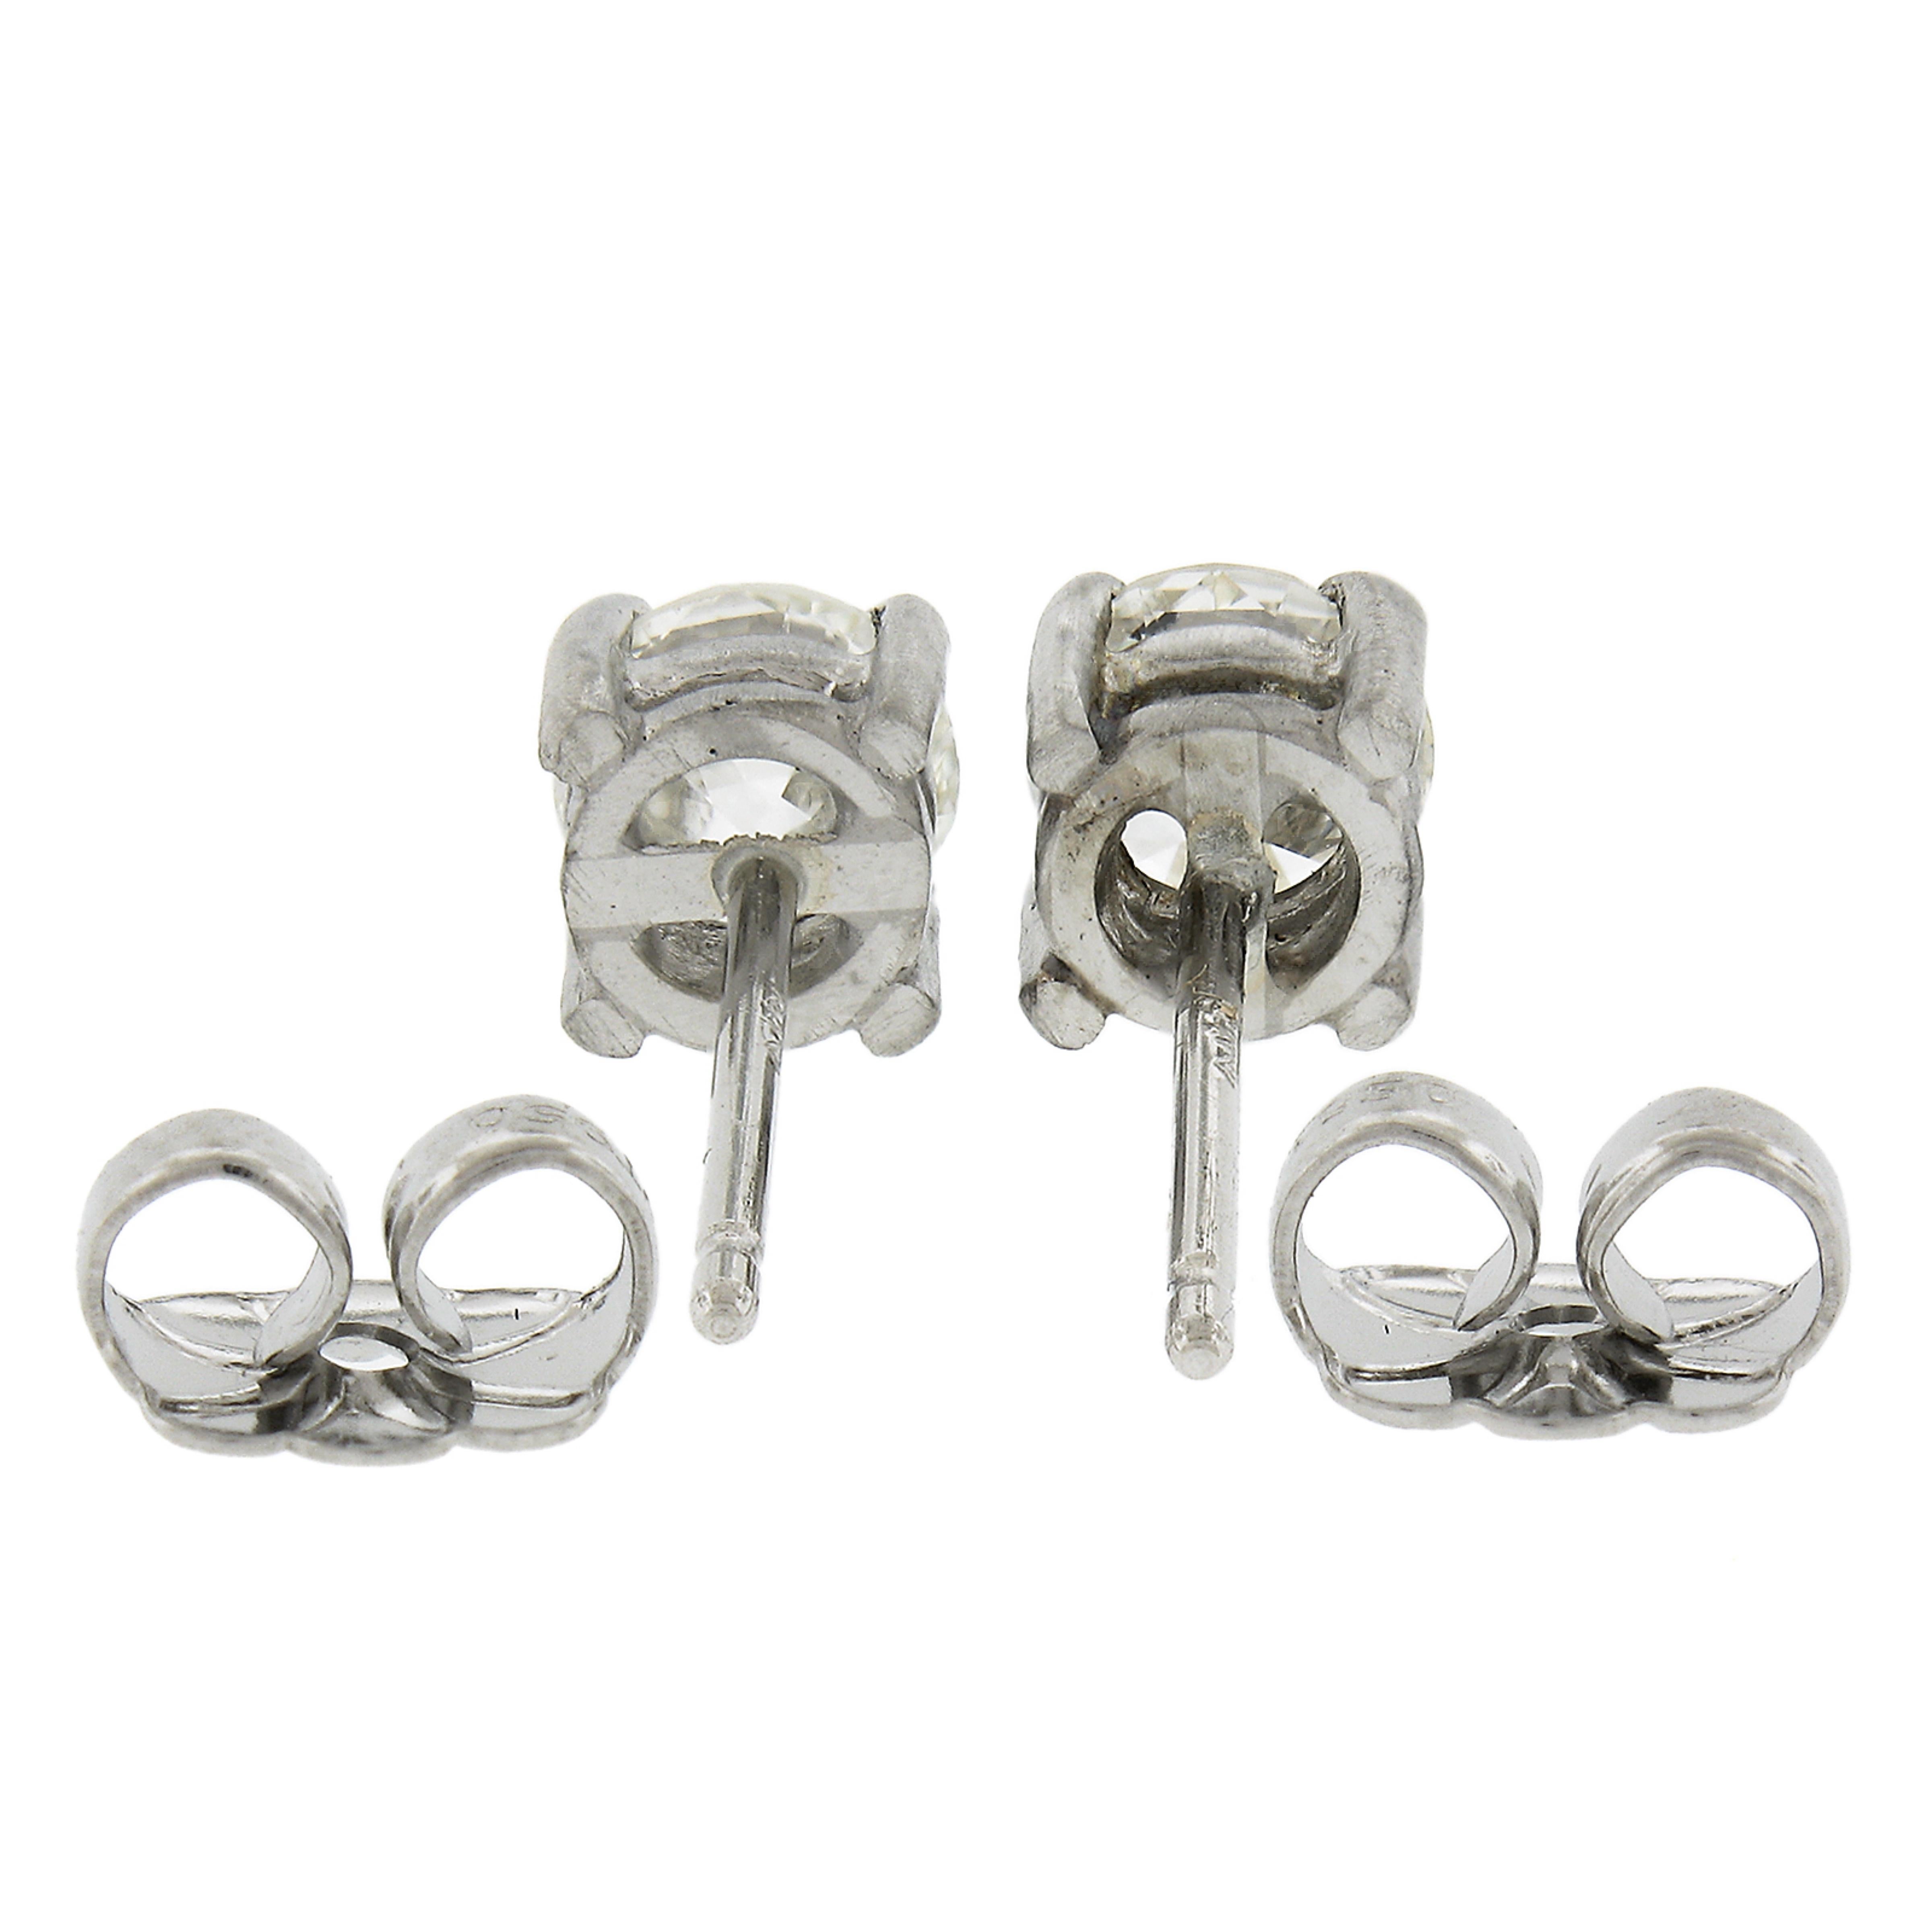 --Stone(s):--
(2) Natural Genuine Diamonds - Old European Cut - 4-Prong Set - I/J Color -SI1/SI2 Clarity
Total Carat Weight:	0.88 (exact)

Material: Solid Platinum 
Weight: 1.87 Grams
Backing:	Post Backs w/ Sturdy Butterfly Closures (Pierced ears